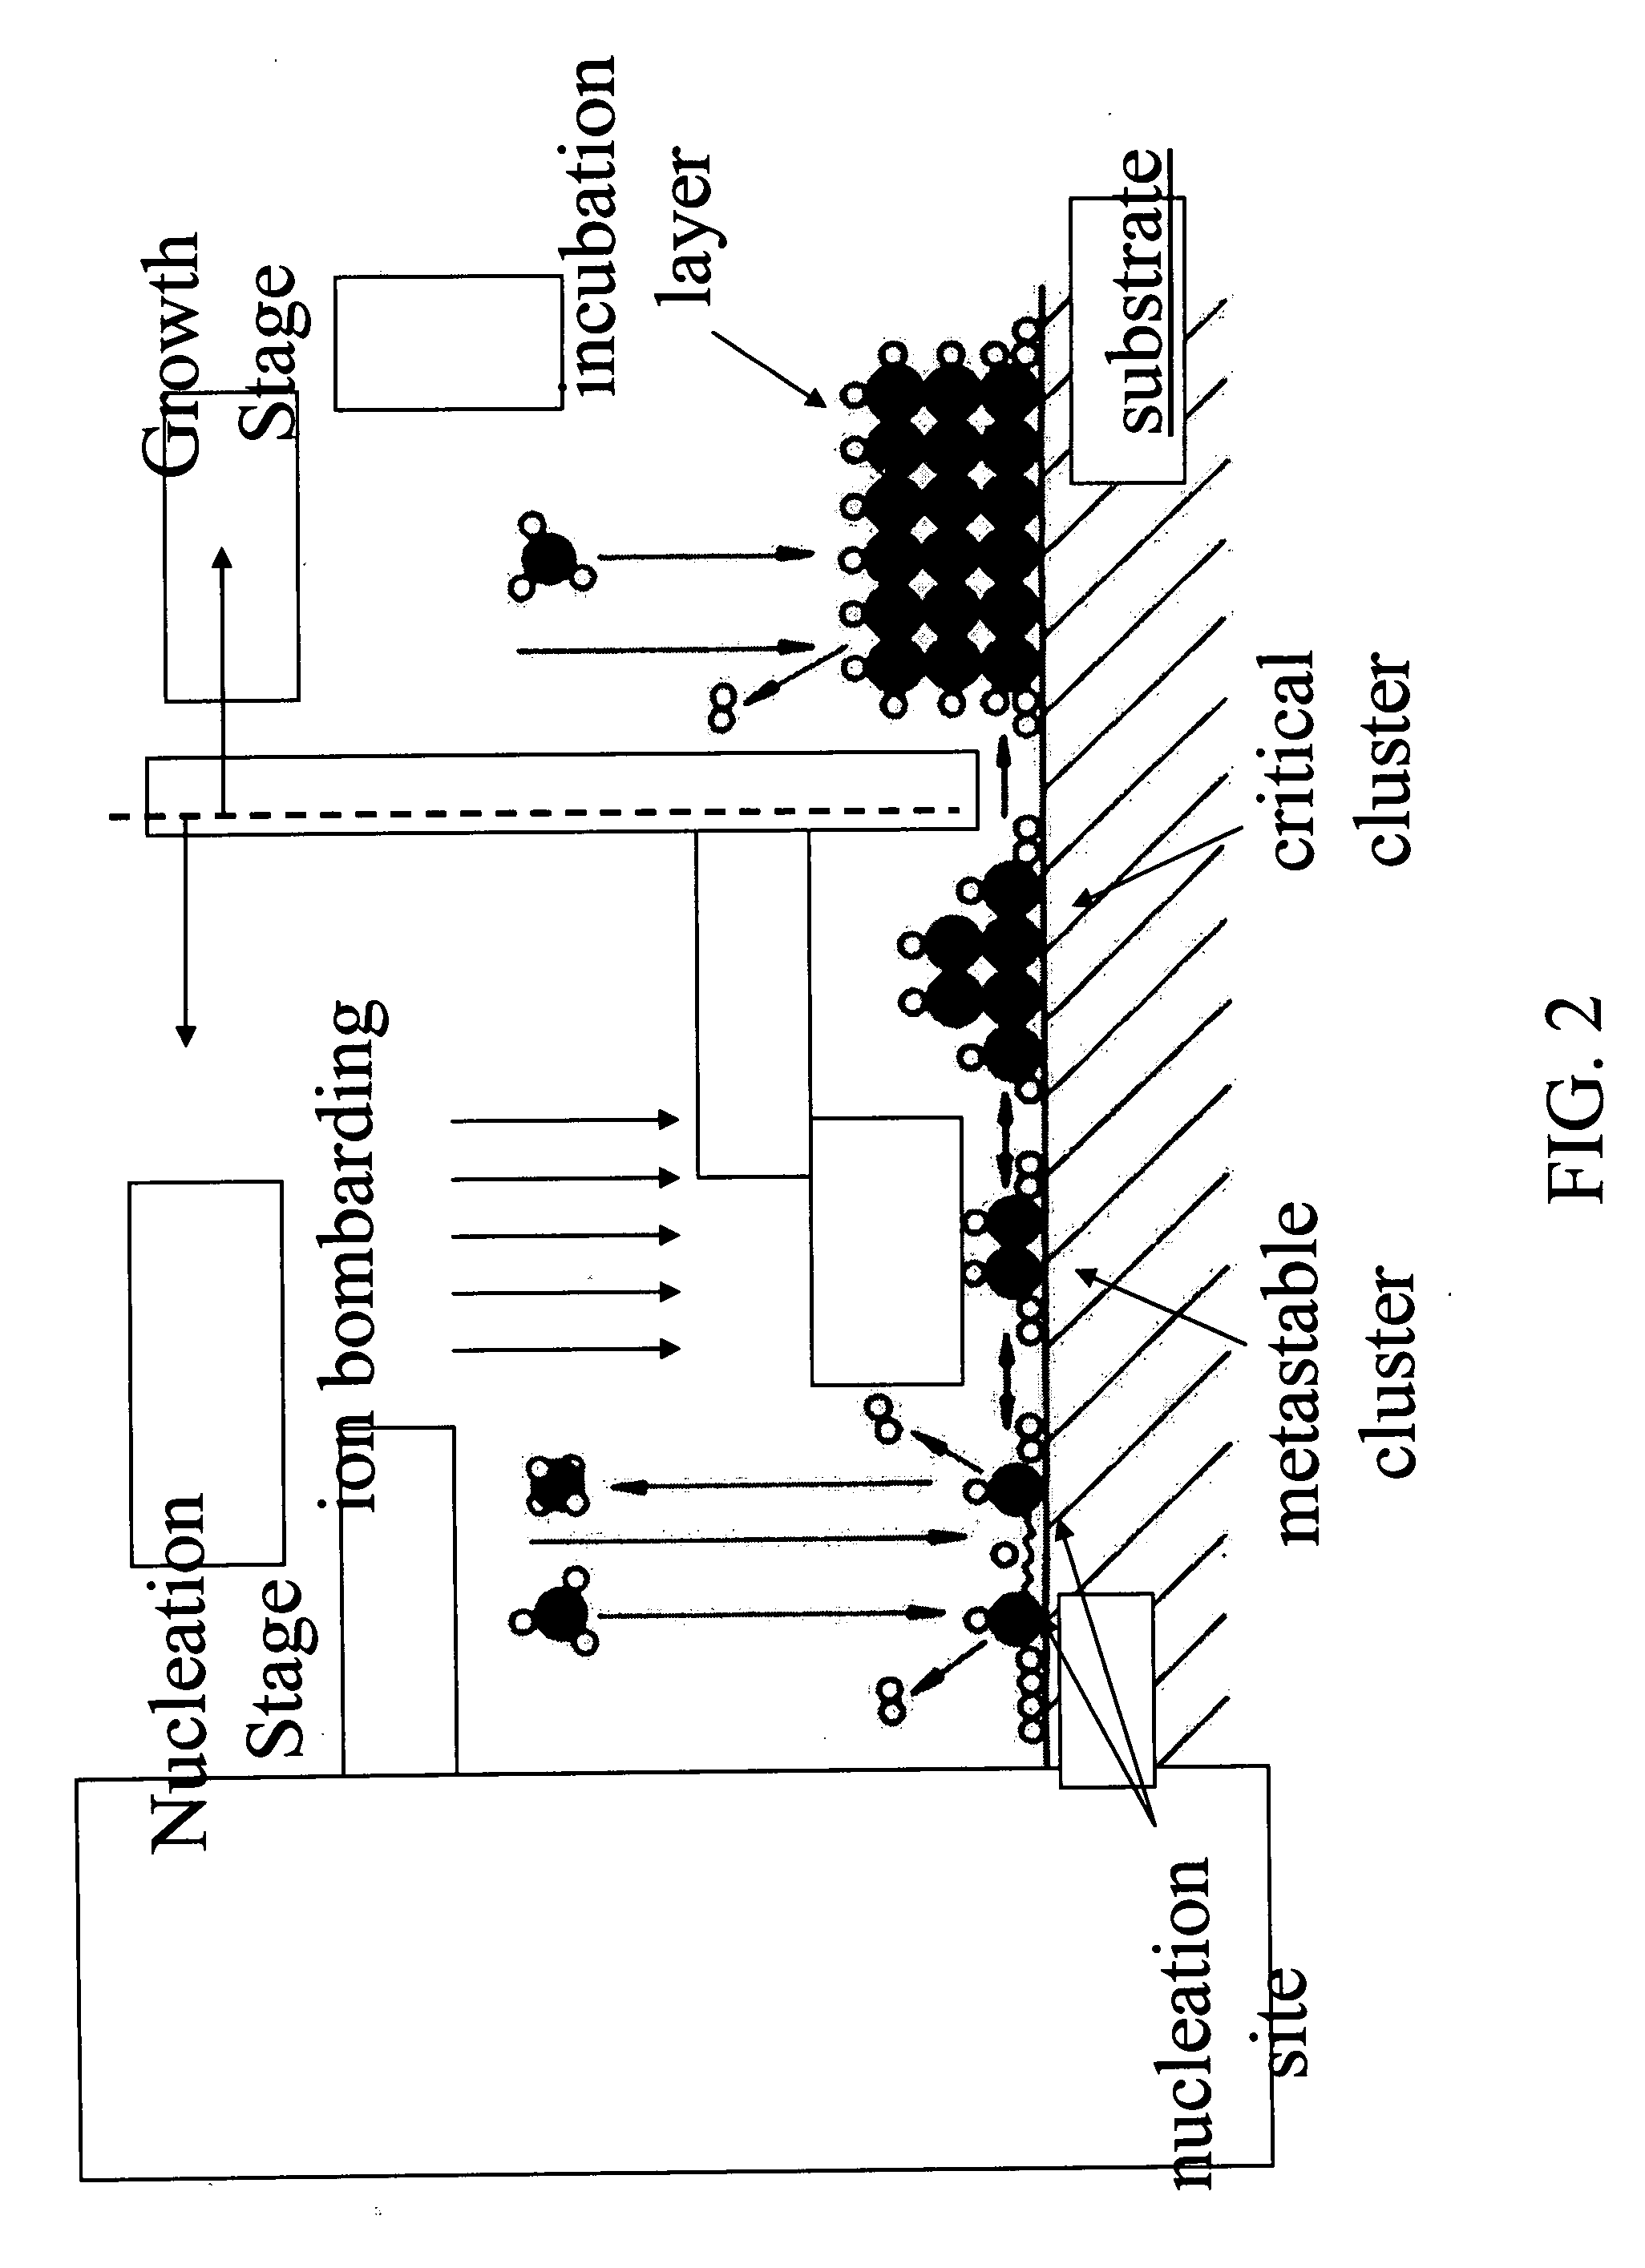 Method of forming microcrystalline silicon film